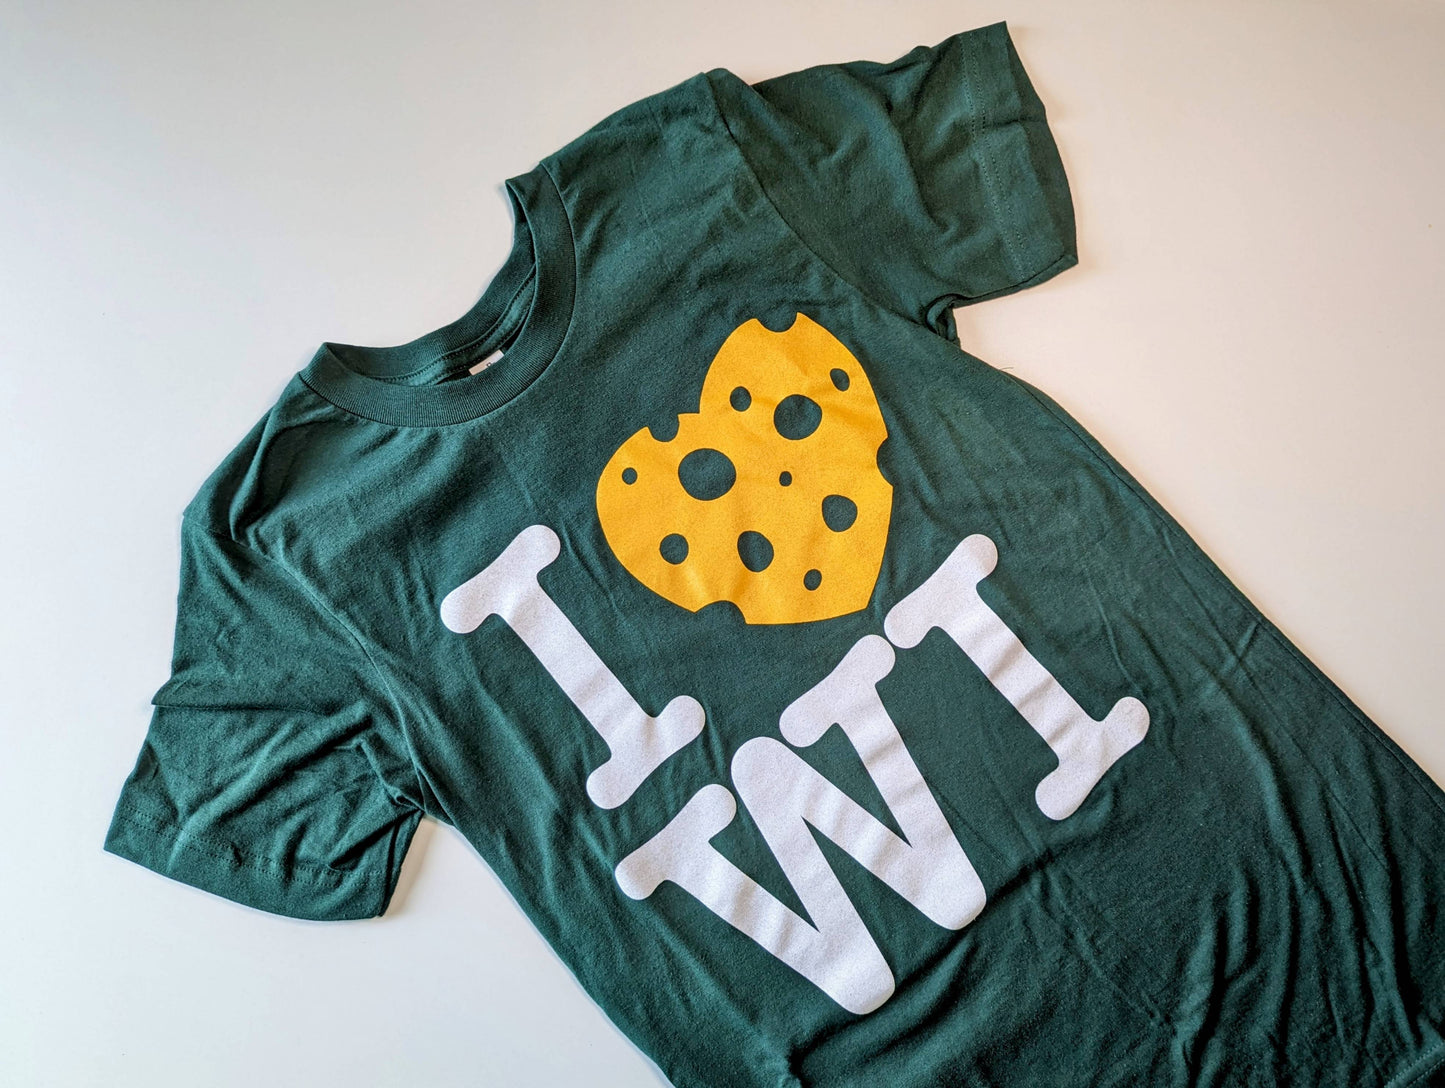 I Love Wisconsin (Cheese) Screen Printed Tee for Wisconsin Travel